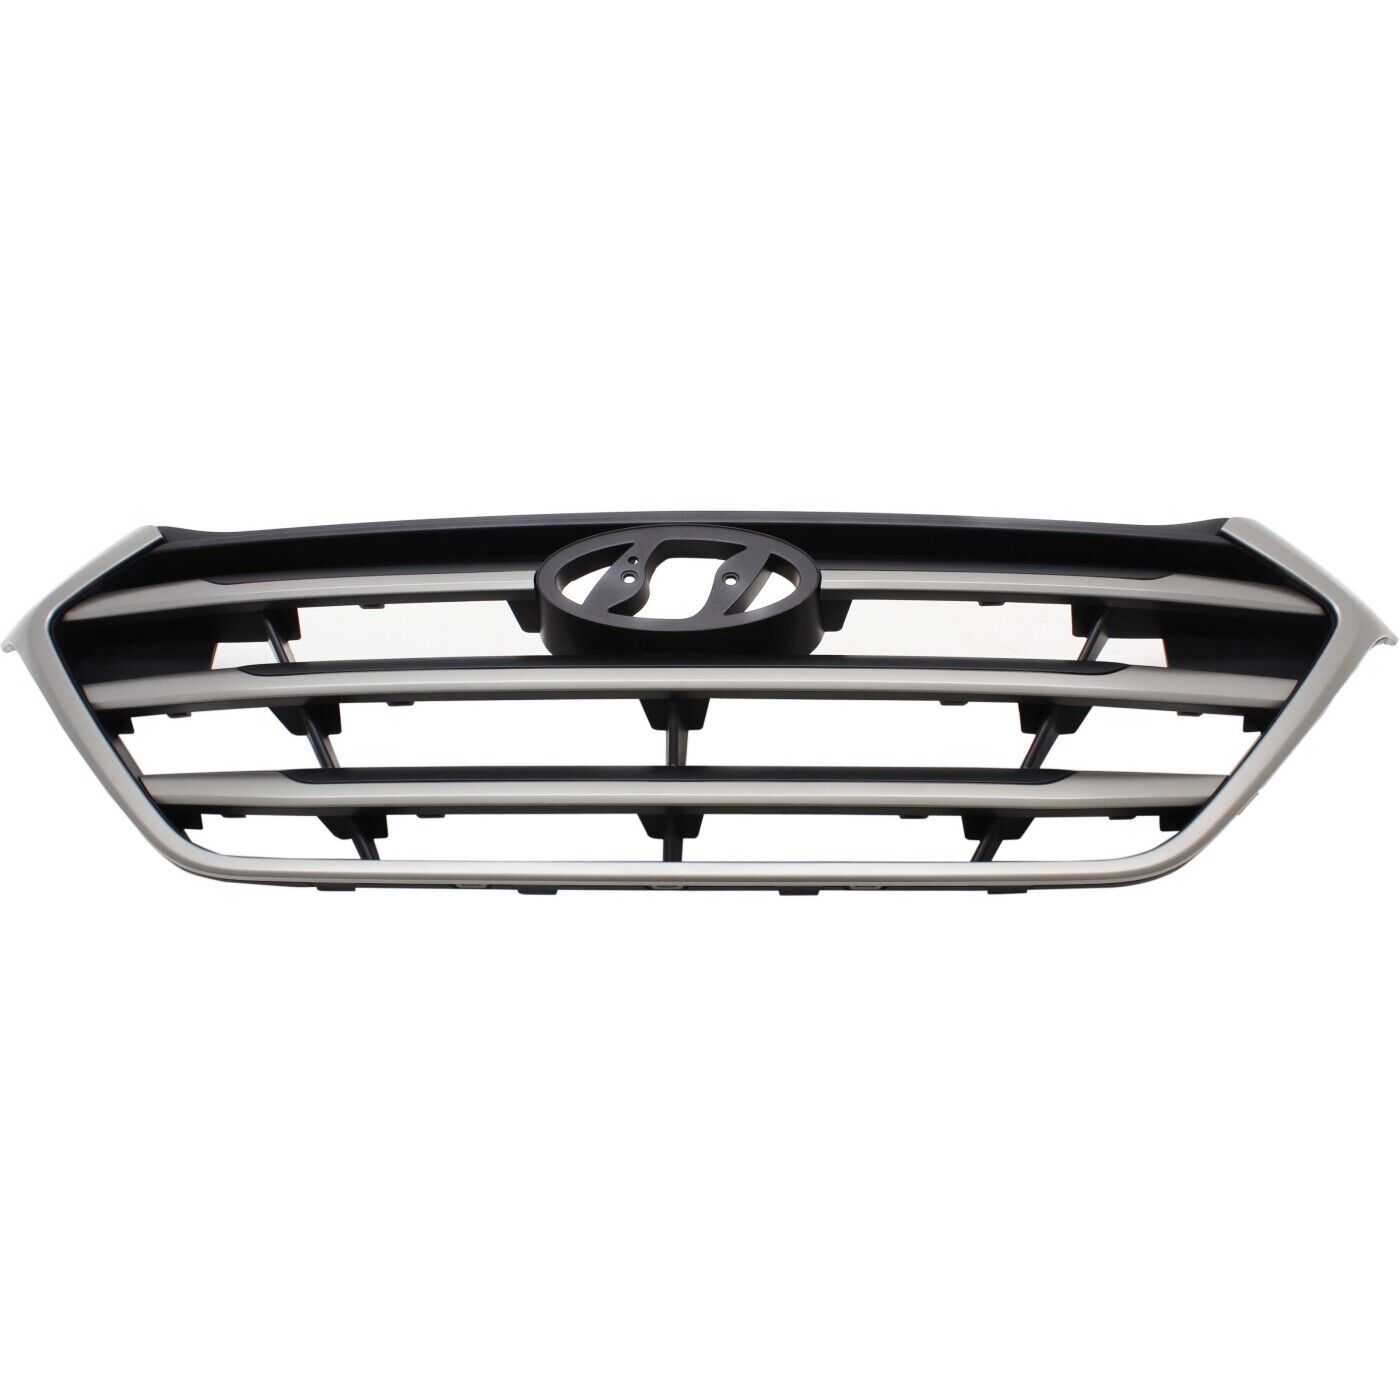 Grille Grill for Hyundai Tucson 2016-2018